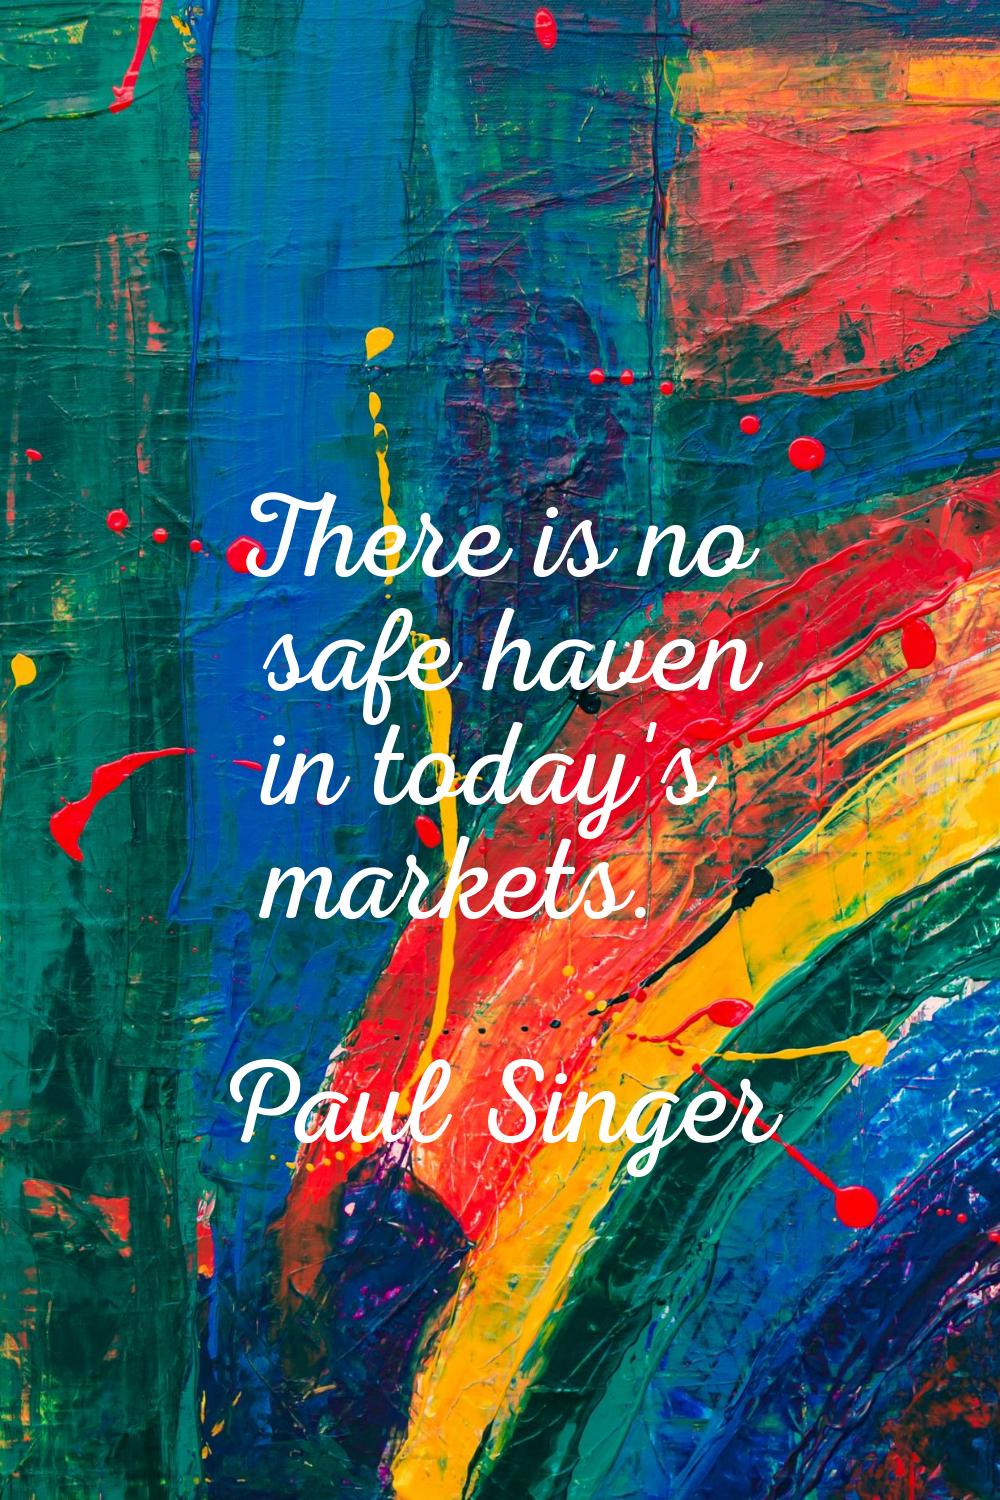 There is no safe haven in today's markets.